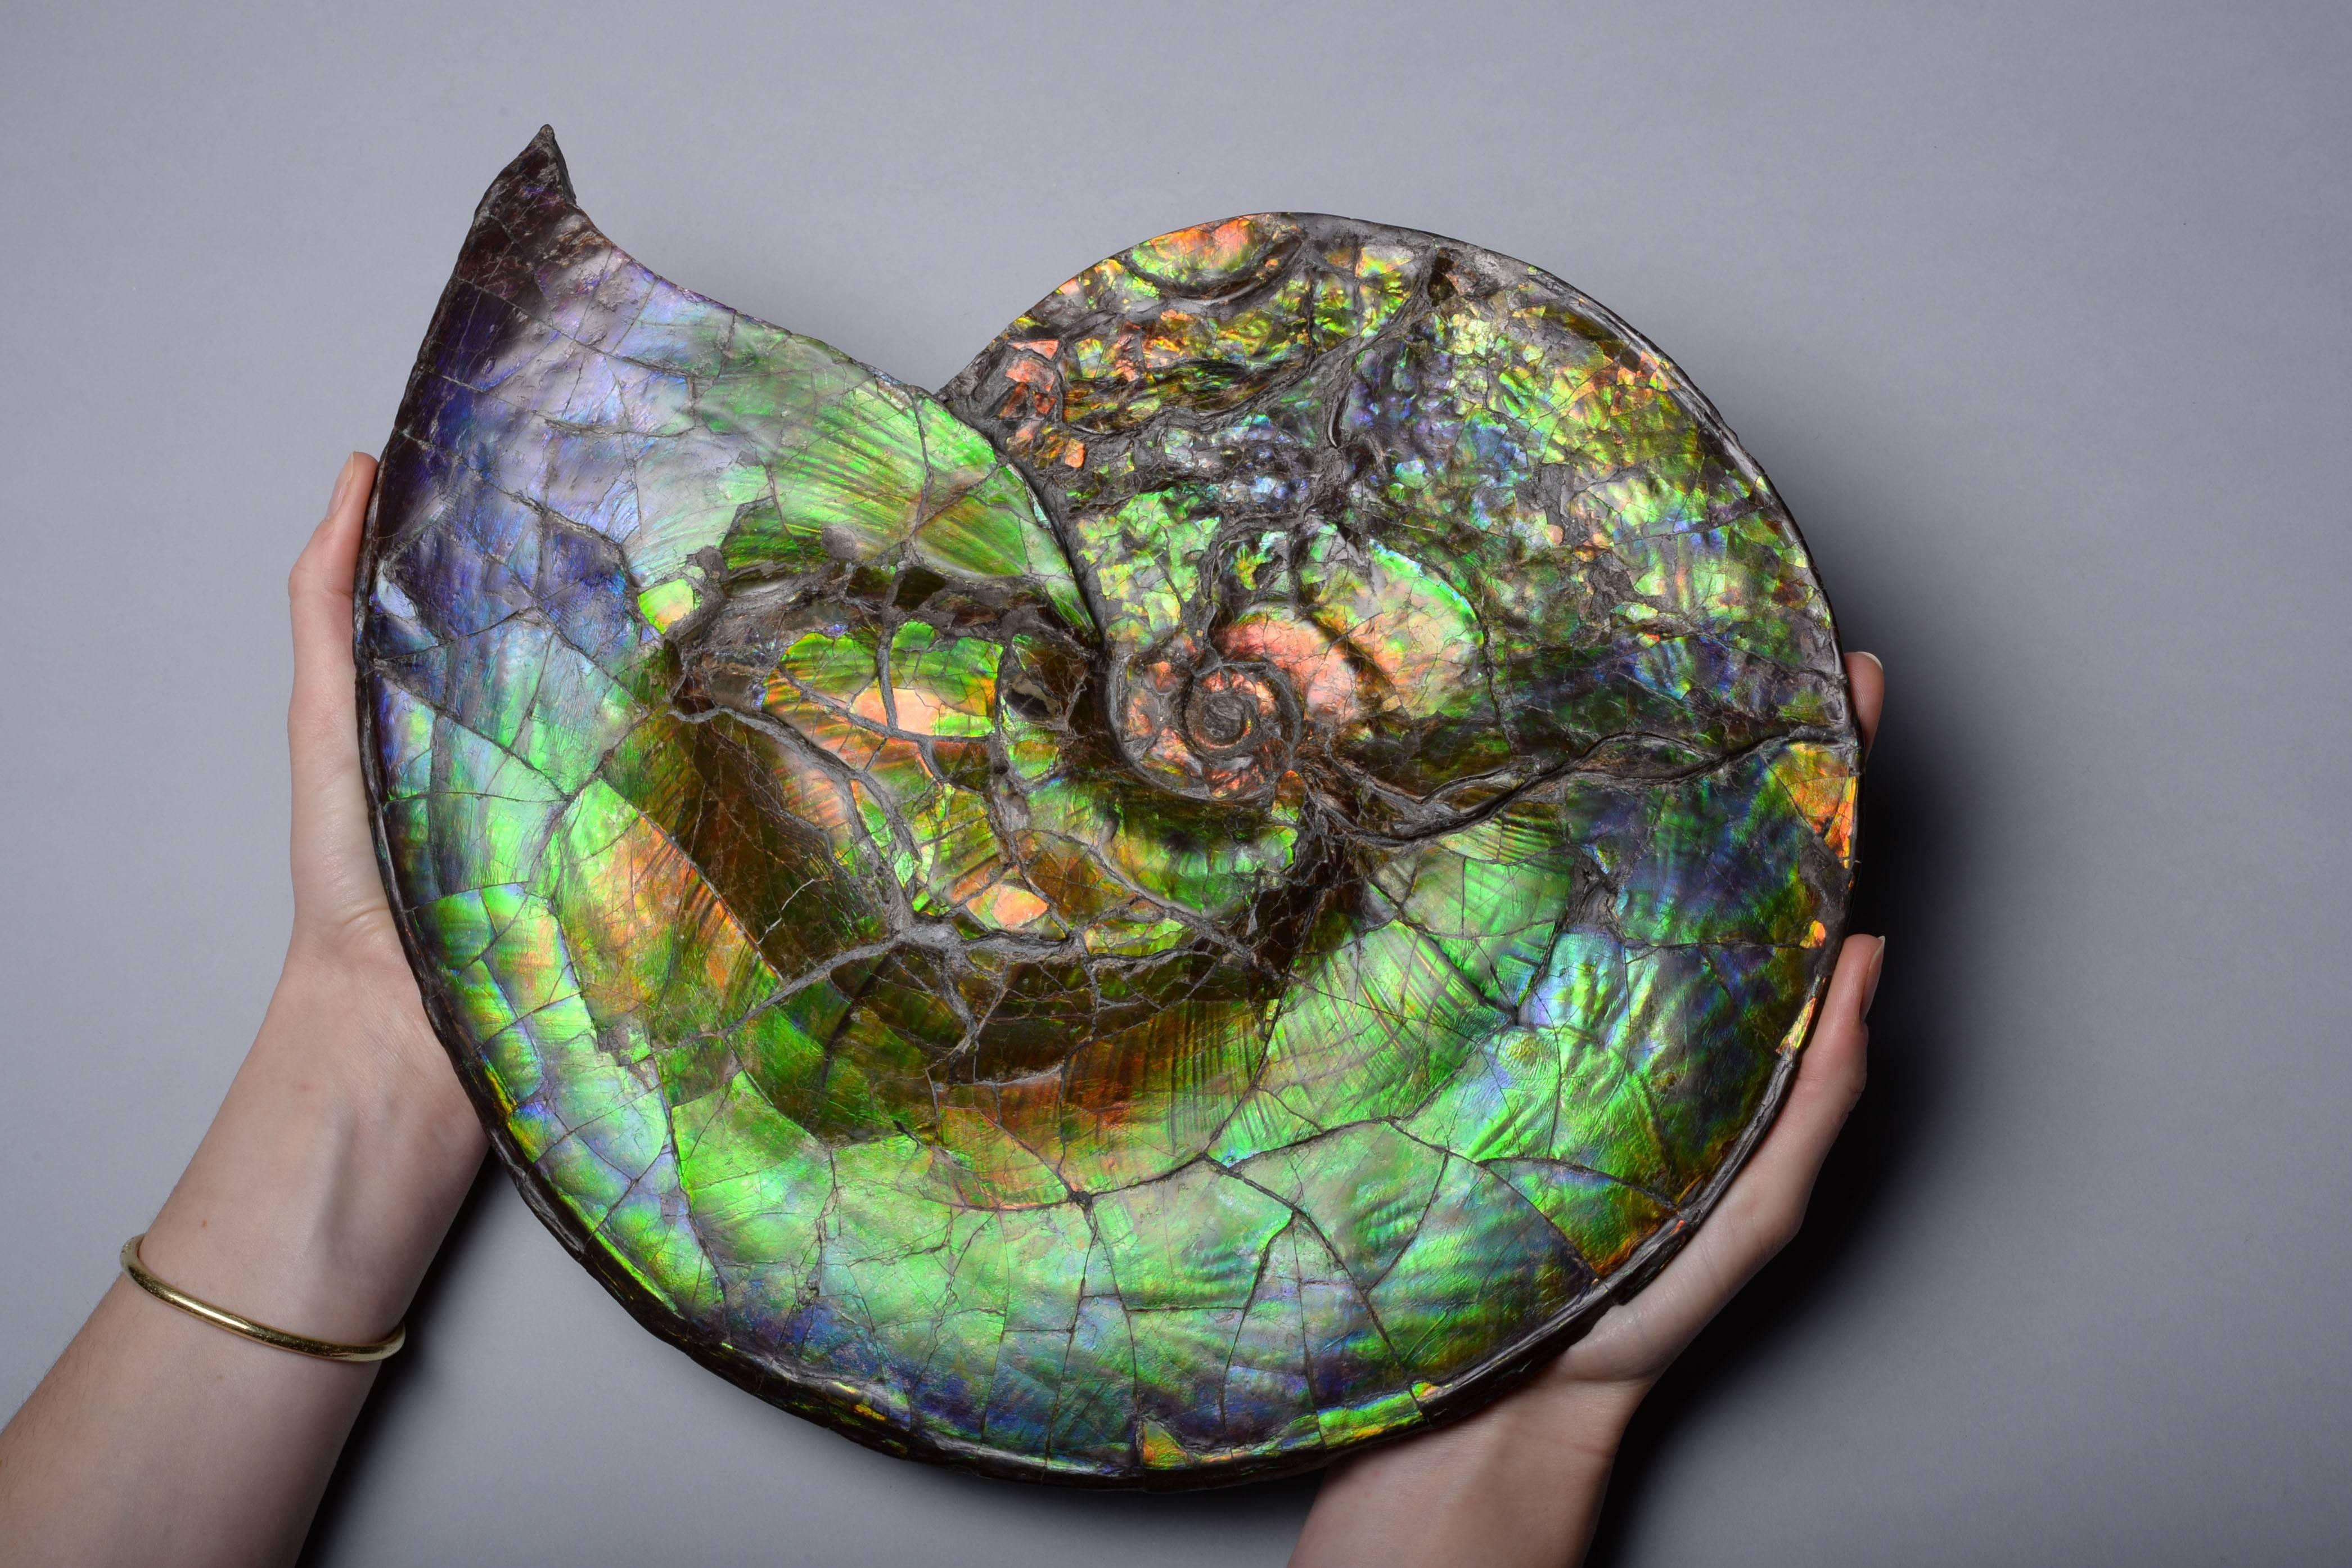 An example of one of the most spectacular fossils in the world. A large and fantastically vibrant ammonite, Placenticeras costatum, from the famous Bearpaw formation. Dating to the late Cretaceous period, around 75 million years before present.

The